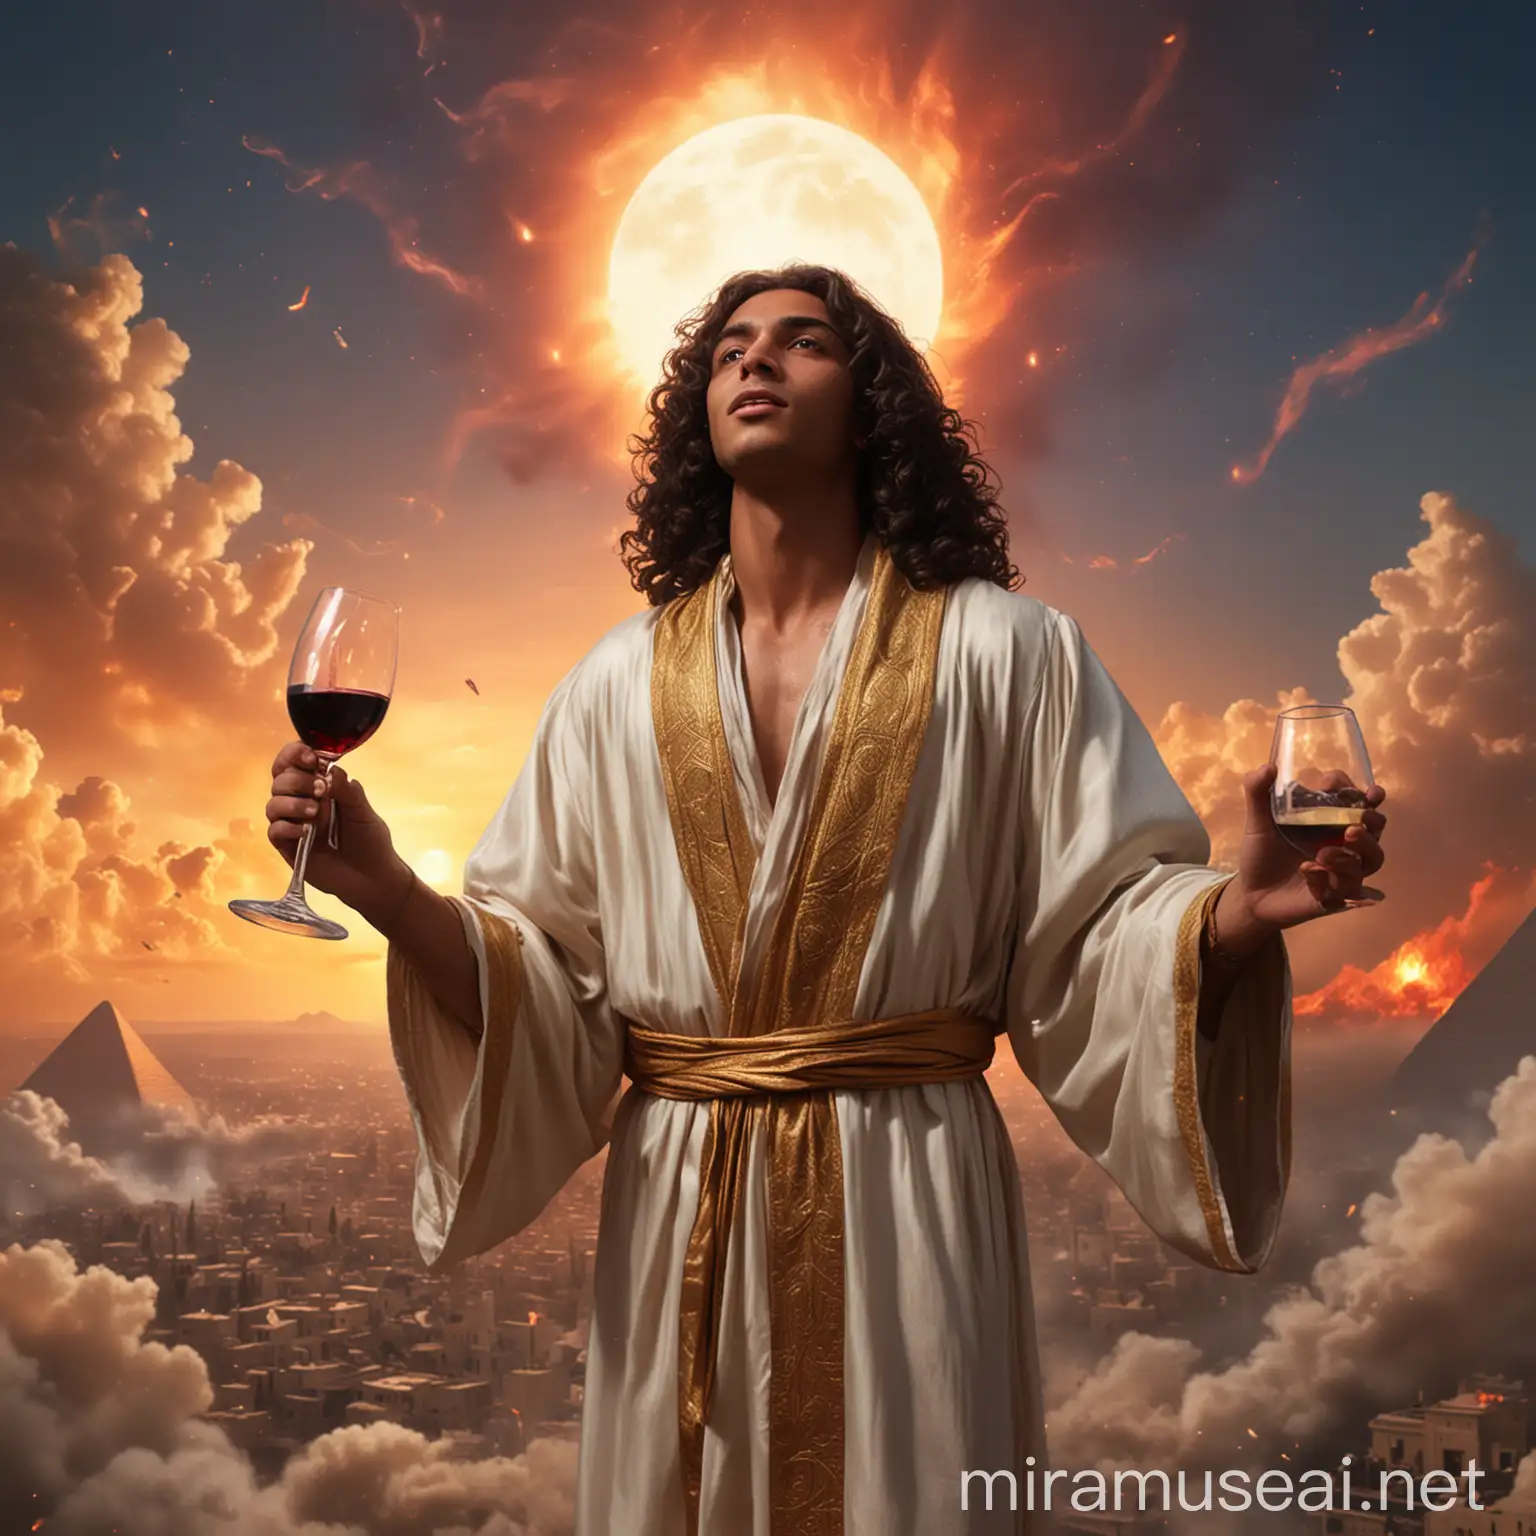 A young Egyptian Pharaoh with long, wavy hair, wearing a silk robe and drinking wine as he floats through the sky and sees the whole world in 2060 burning.